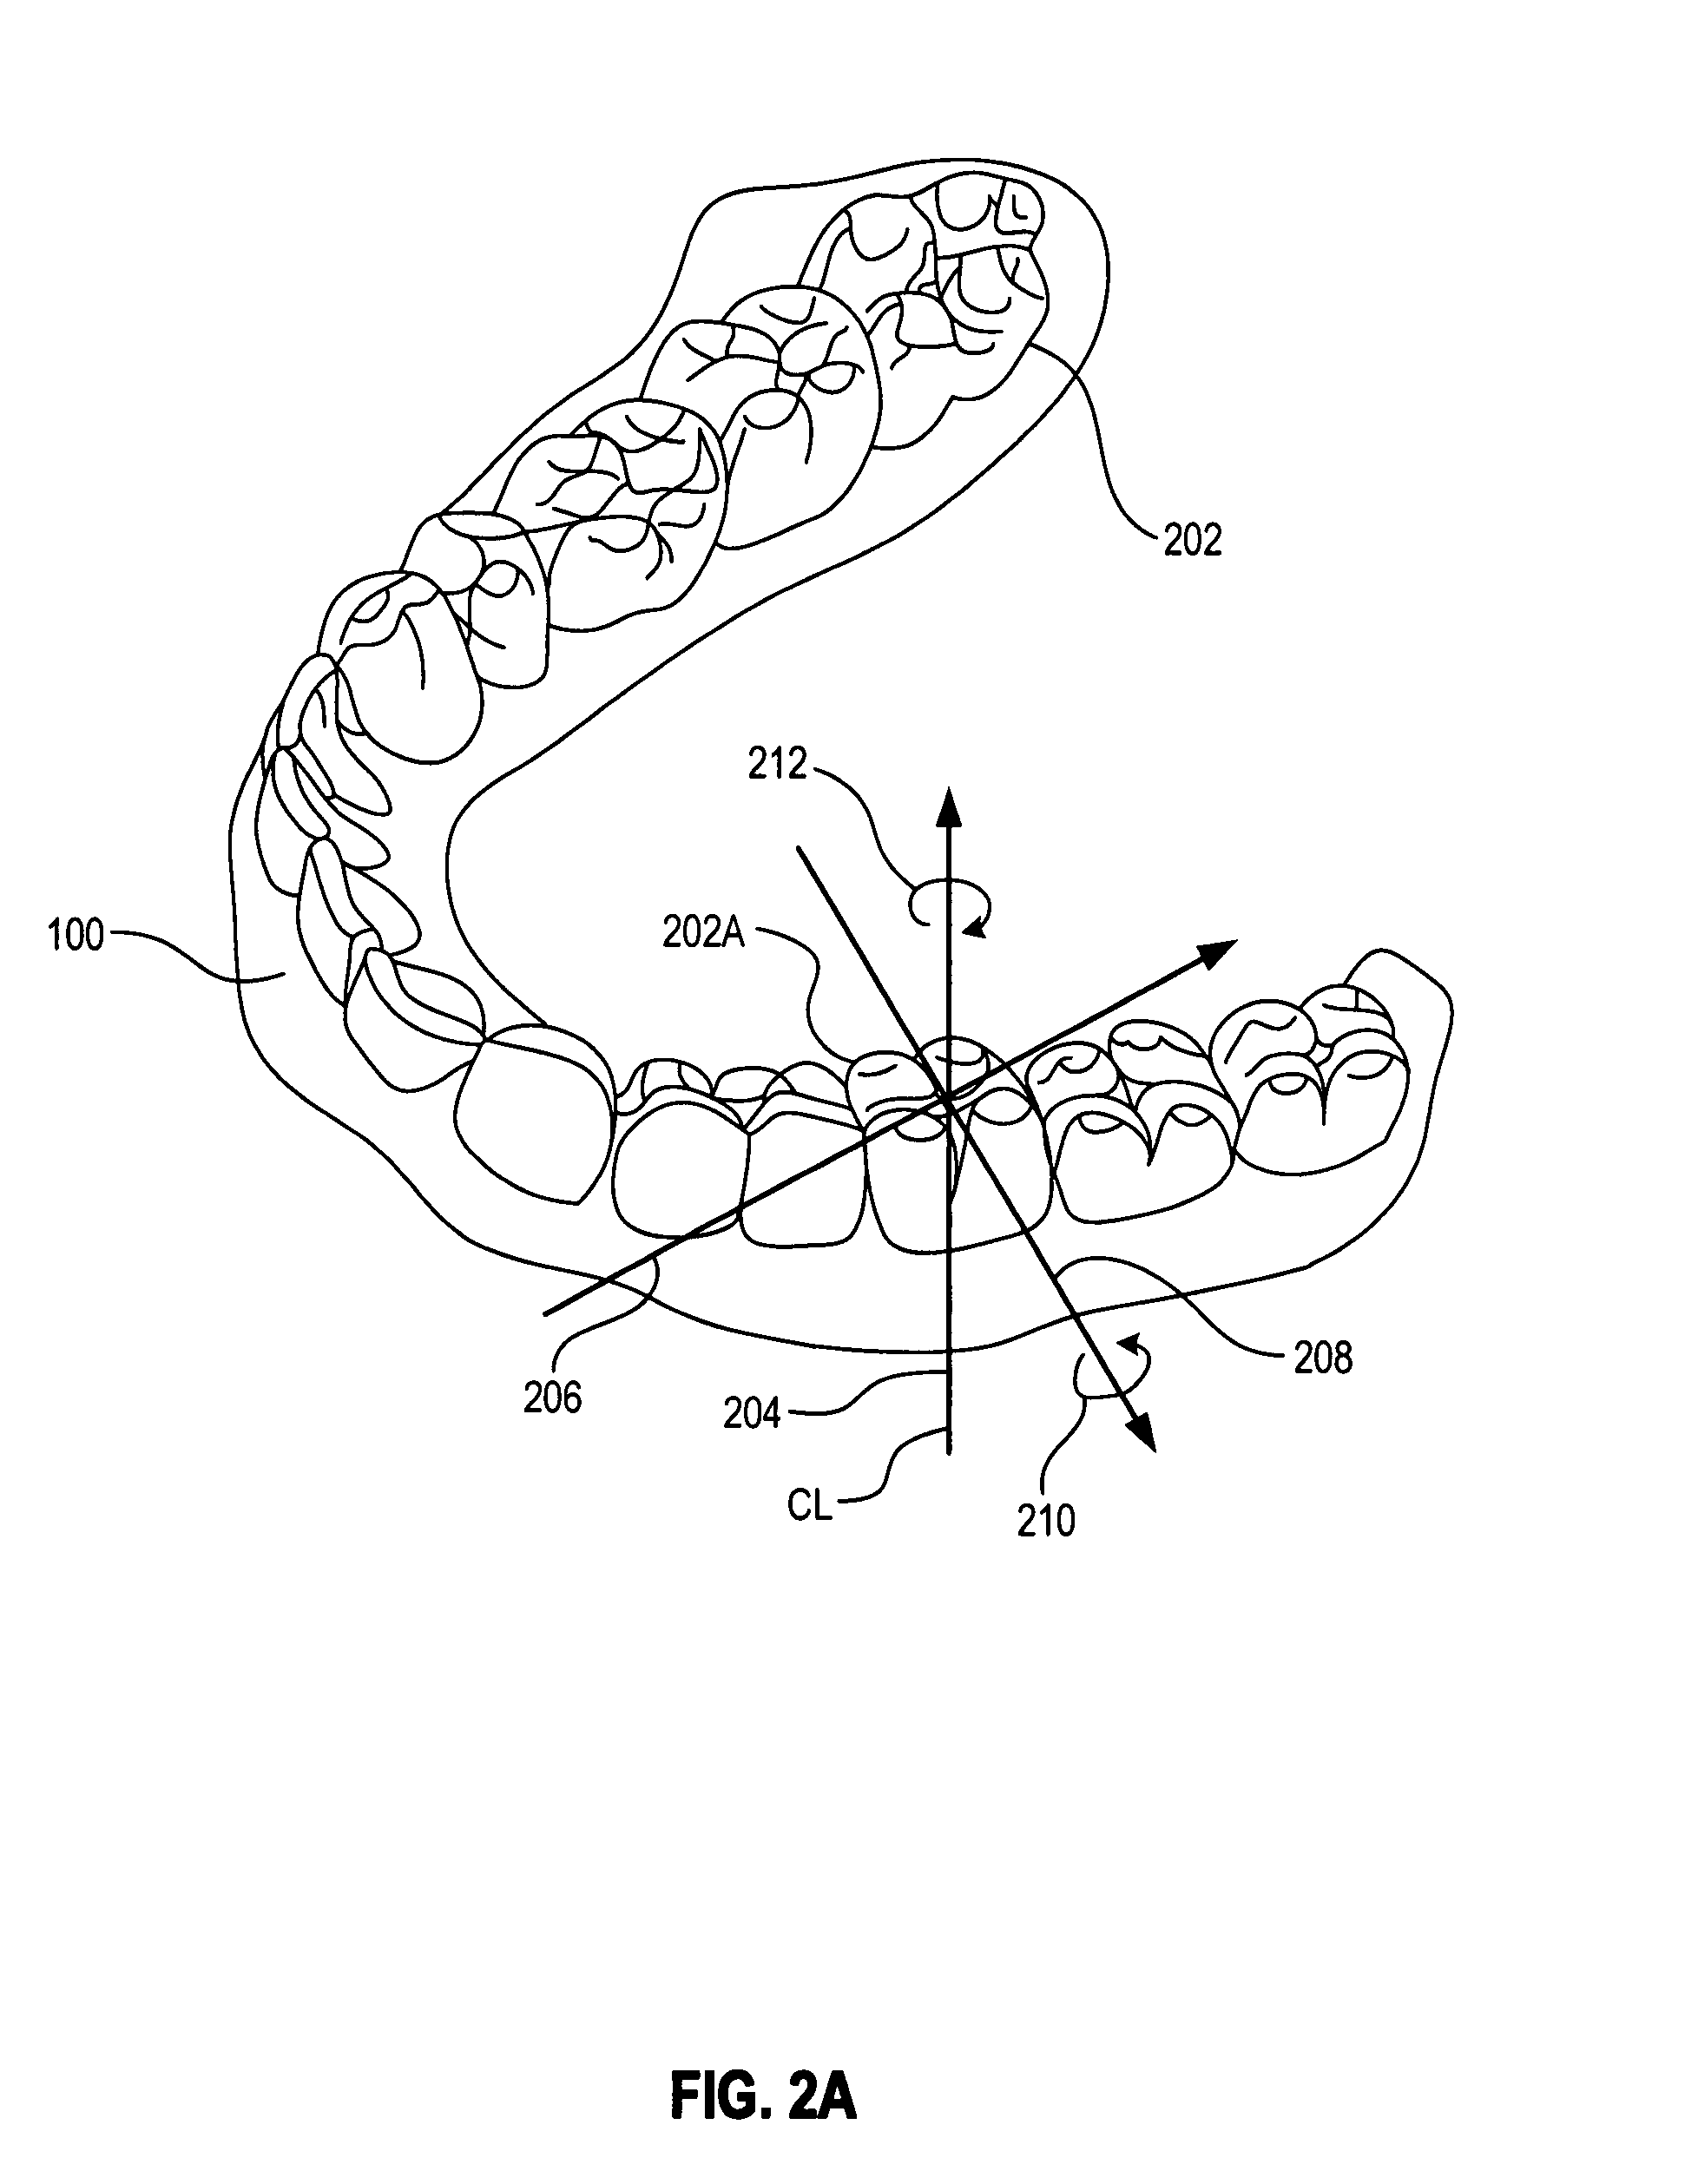 Active attachments for interacting with a polymeric shell dental appliance